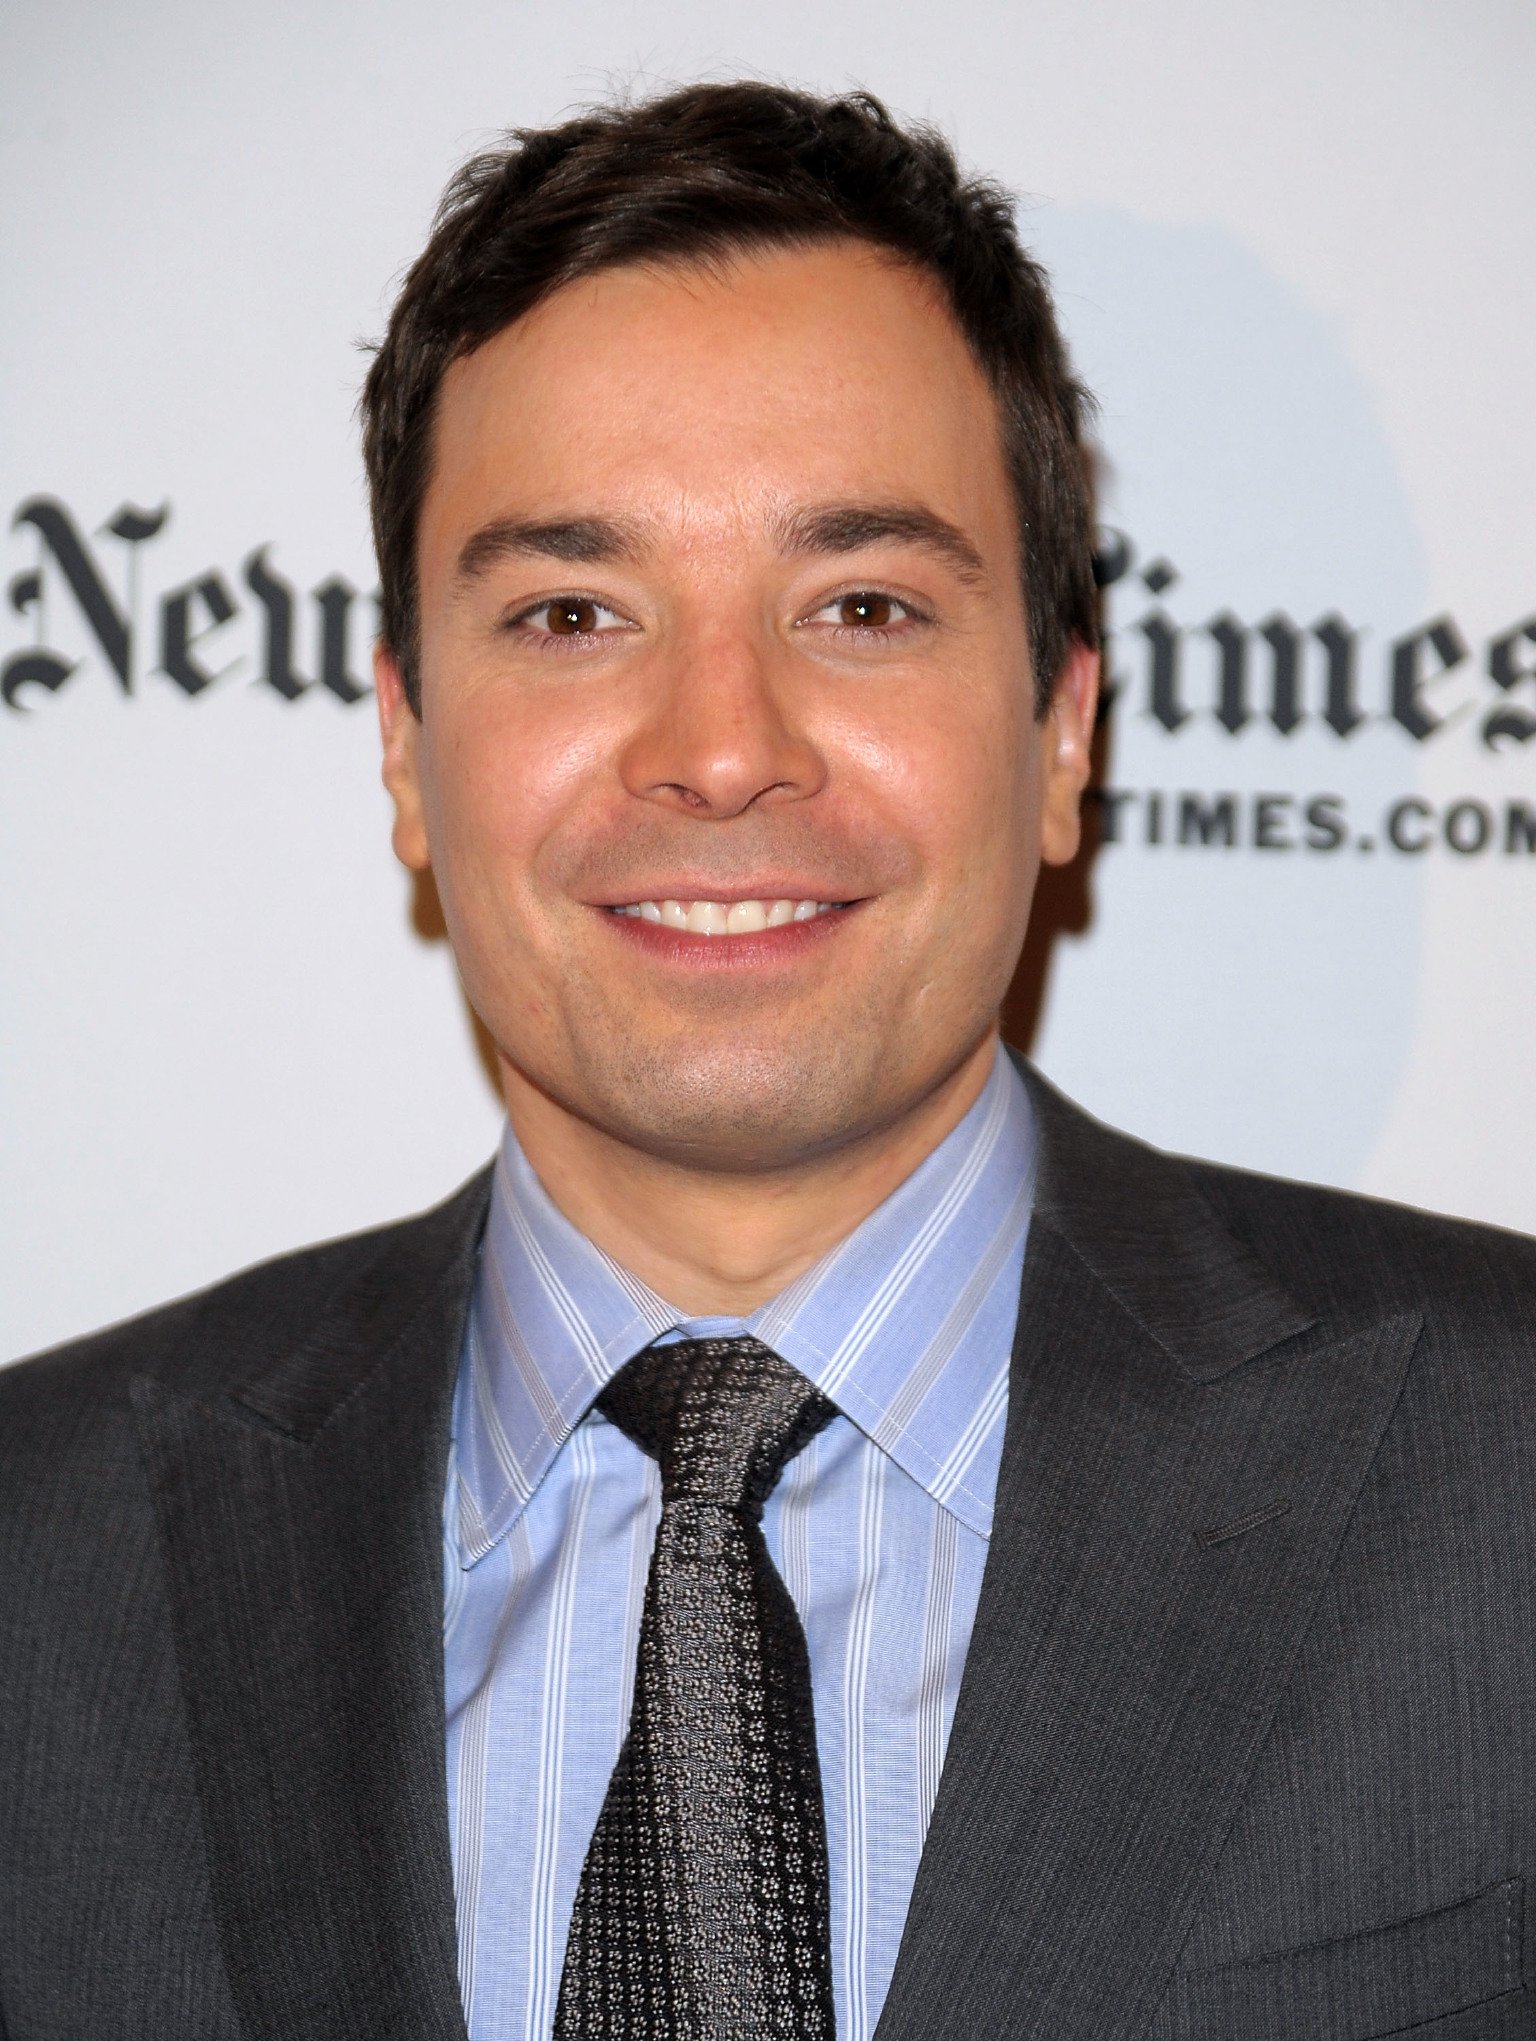 Television personality Jimmy Fallon attends the 9th Annual New York Times Arts & Leisure Weekend at The Times Center on January 8, 2010 | Photo: Getty Images